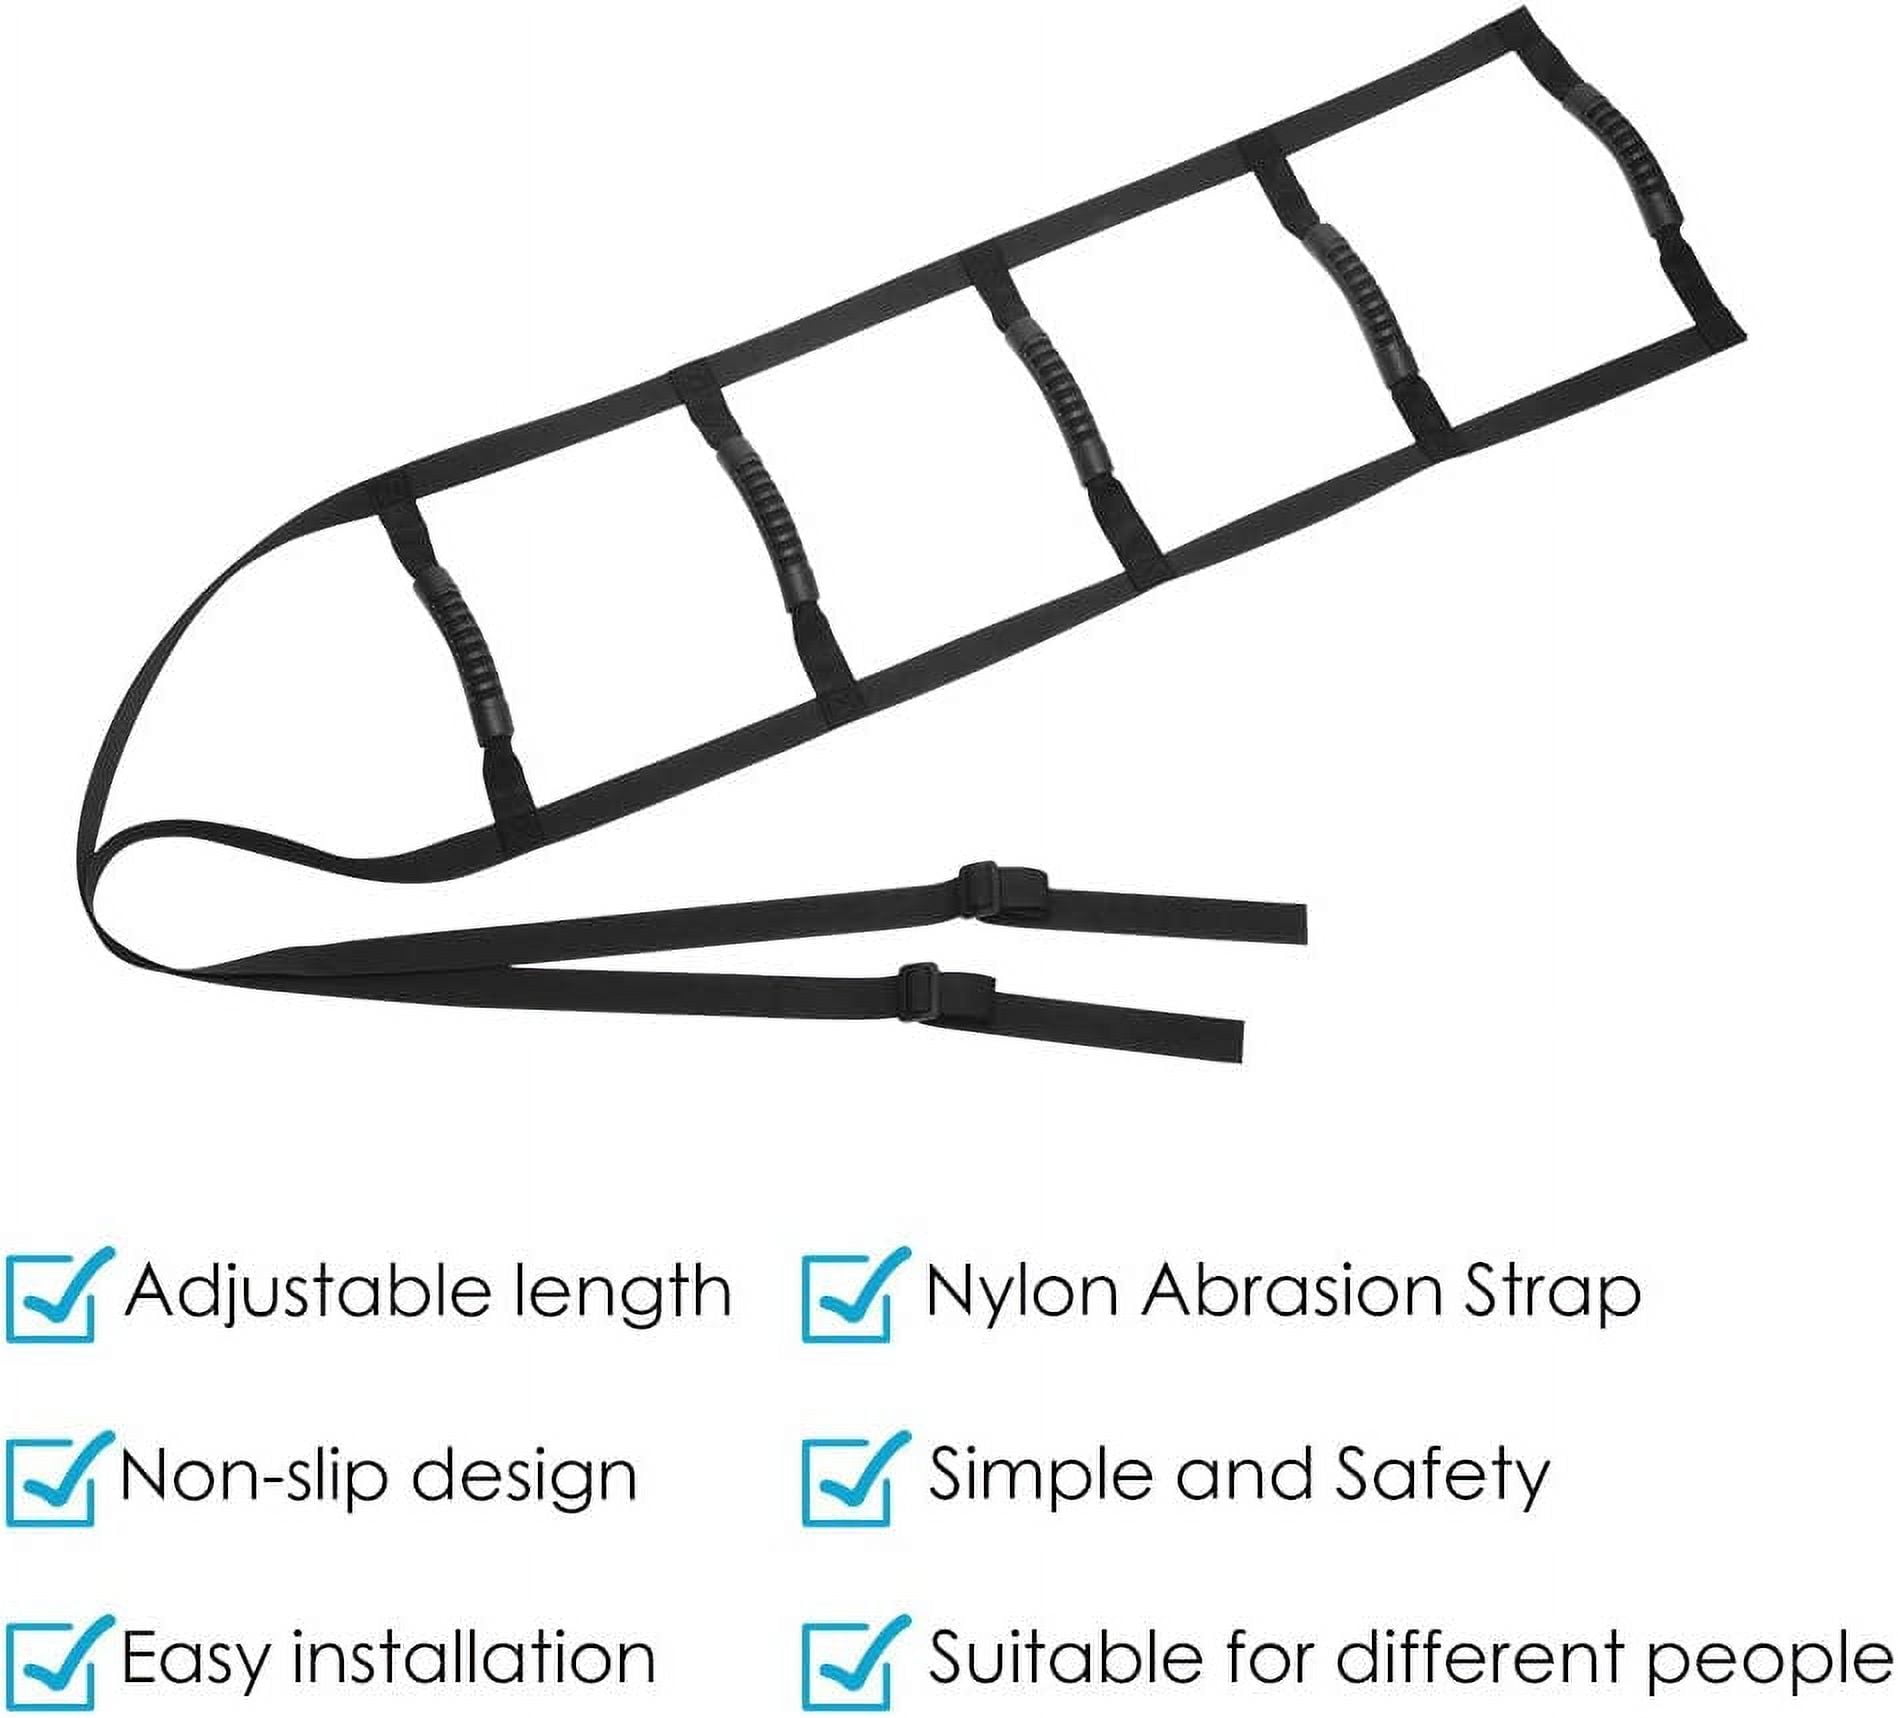  Vive Bed Ladder Assist - Pull Up Assist Device with Handle  Strap - Rope Ladder Caddie Helper - Sitting, Sit Up Hoist for Elderly,  Senior, Injury Recovery Patient, Pregnant, Handicap 